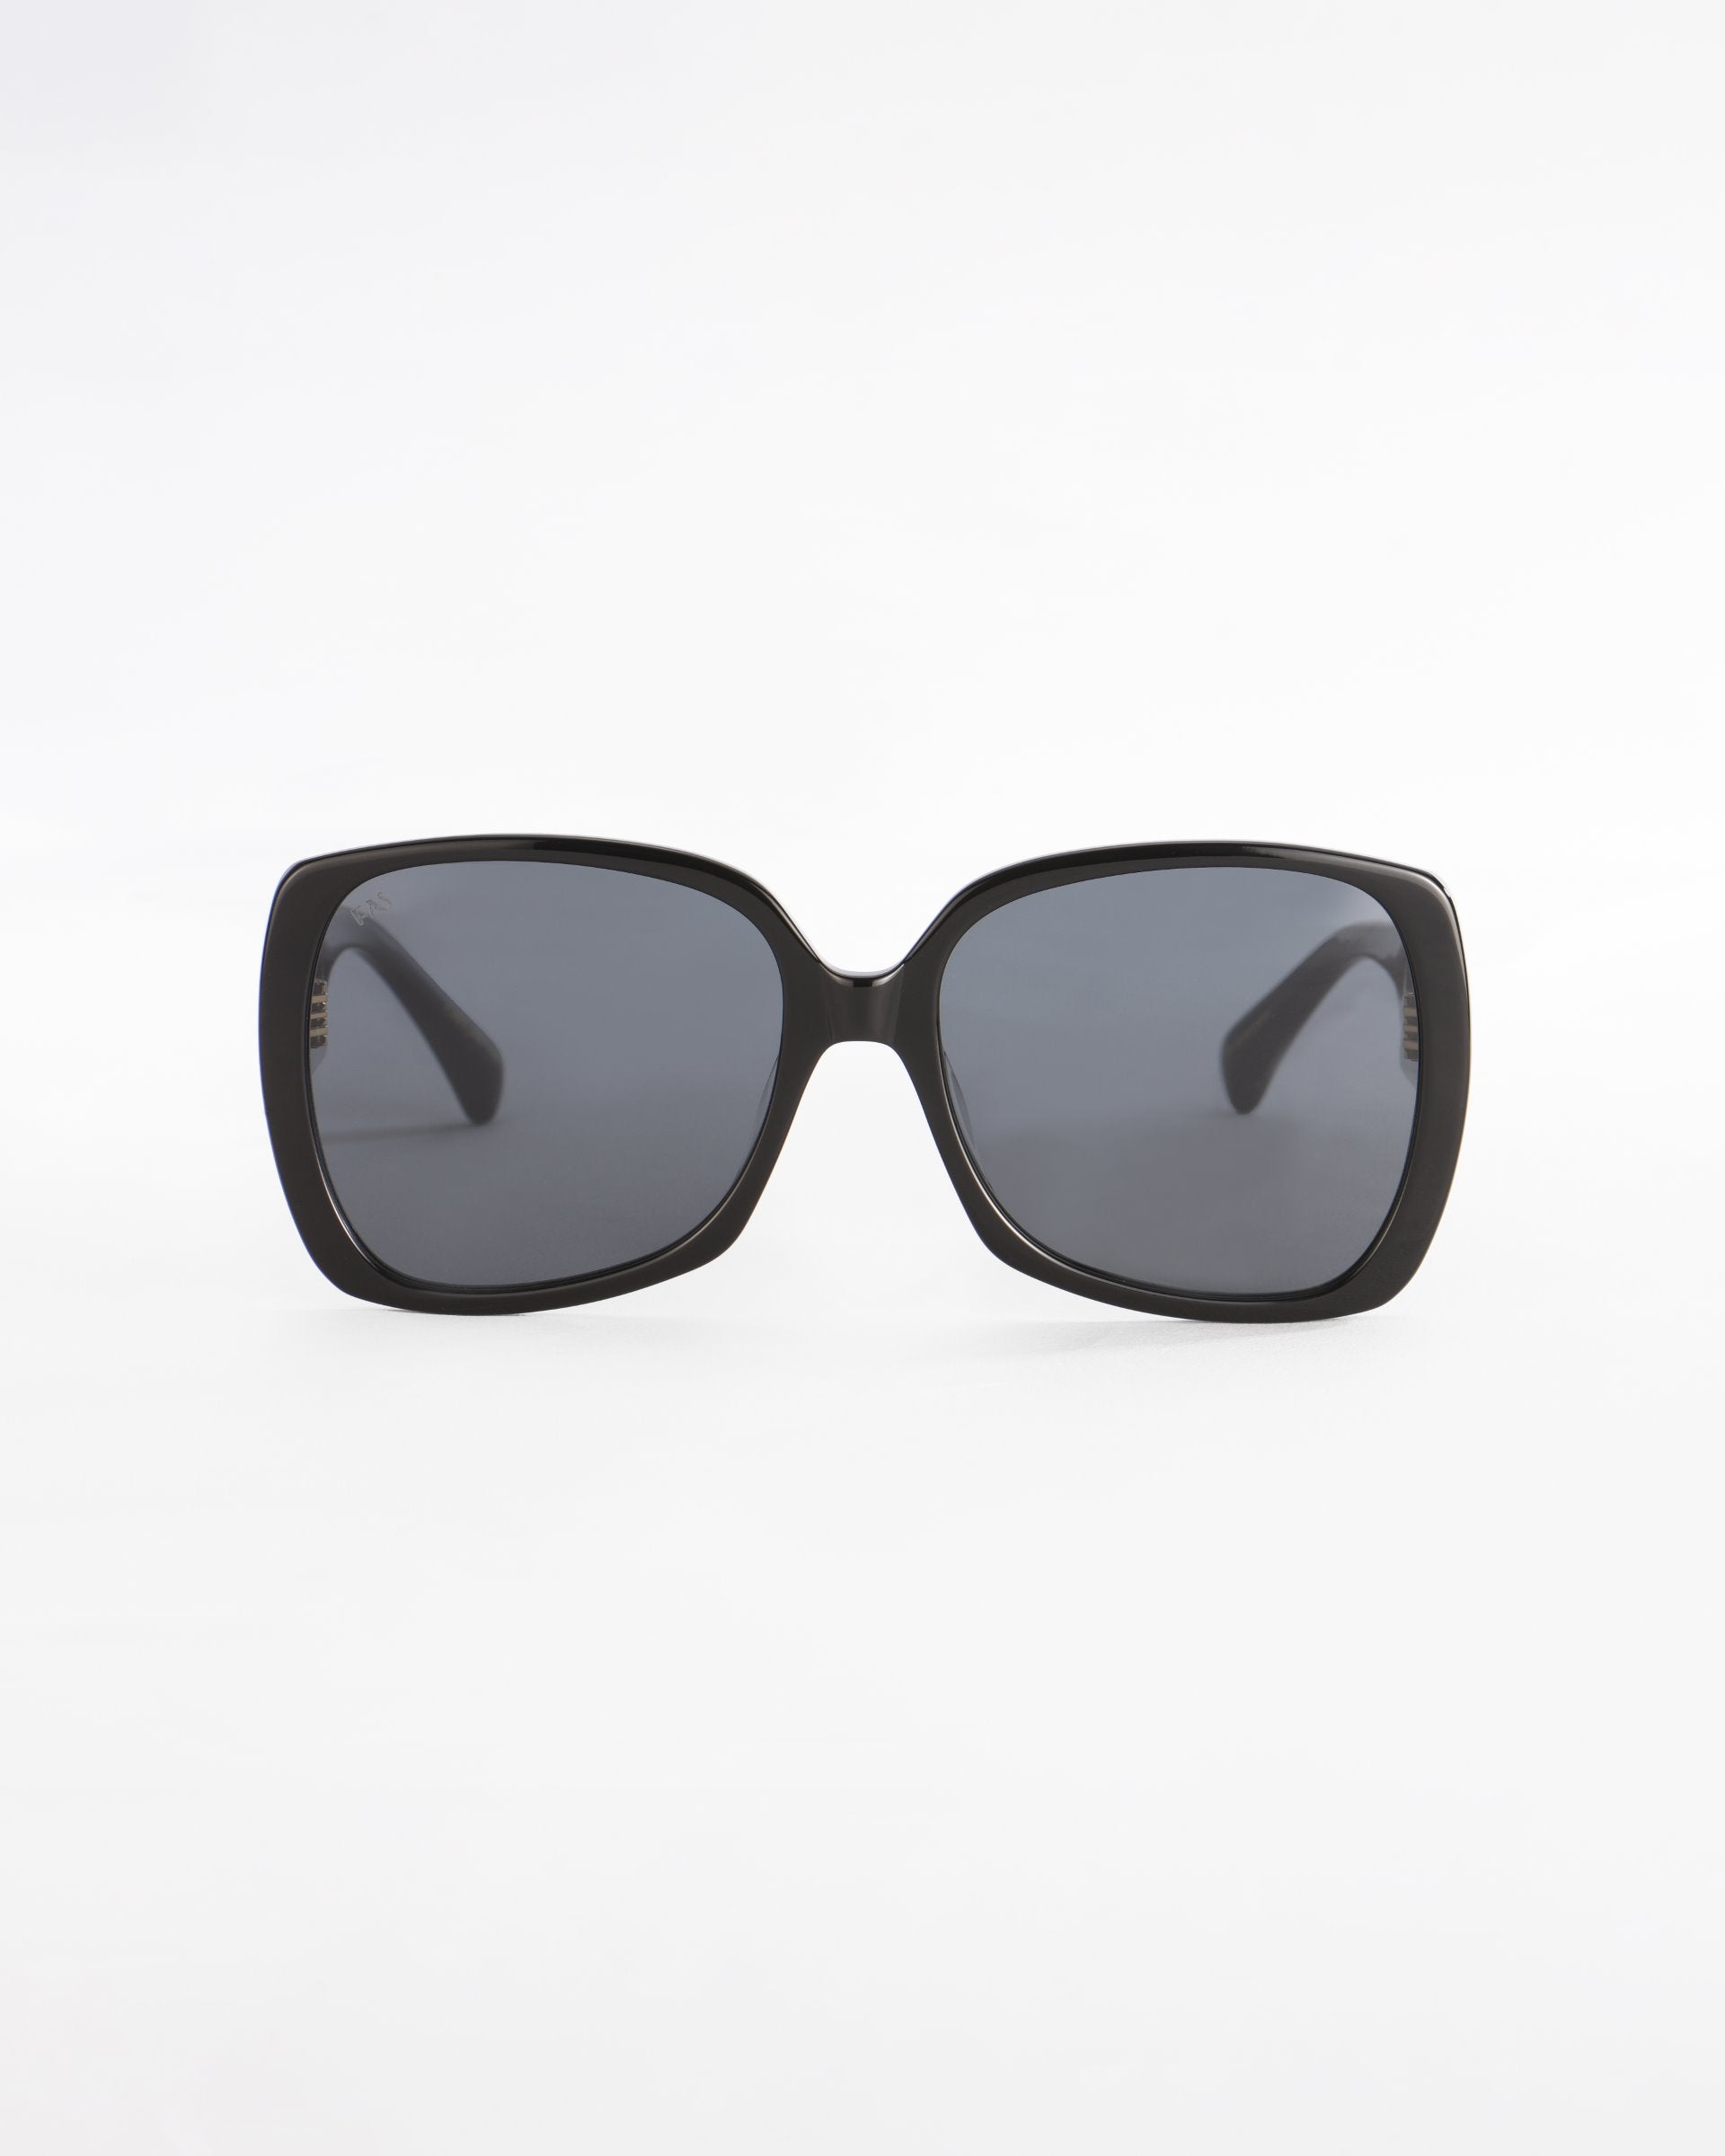 A pair of black, oversized square Odyssey sunglasses by For Art&#39;s Sake® with dark tinted, lightweight nylon lenses is displayed against a plain white background. The design is simple and modern, featuring thick frames made from plant-based acetate and wide arms.